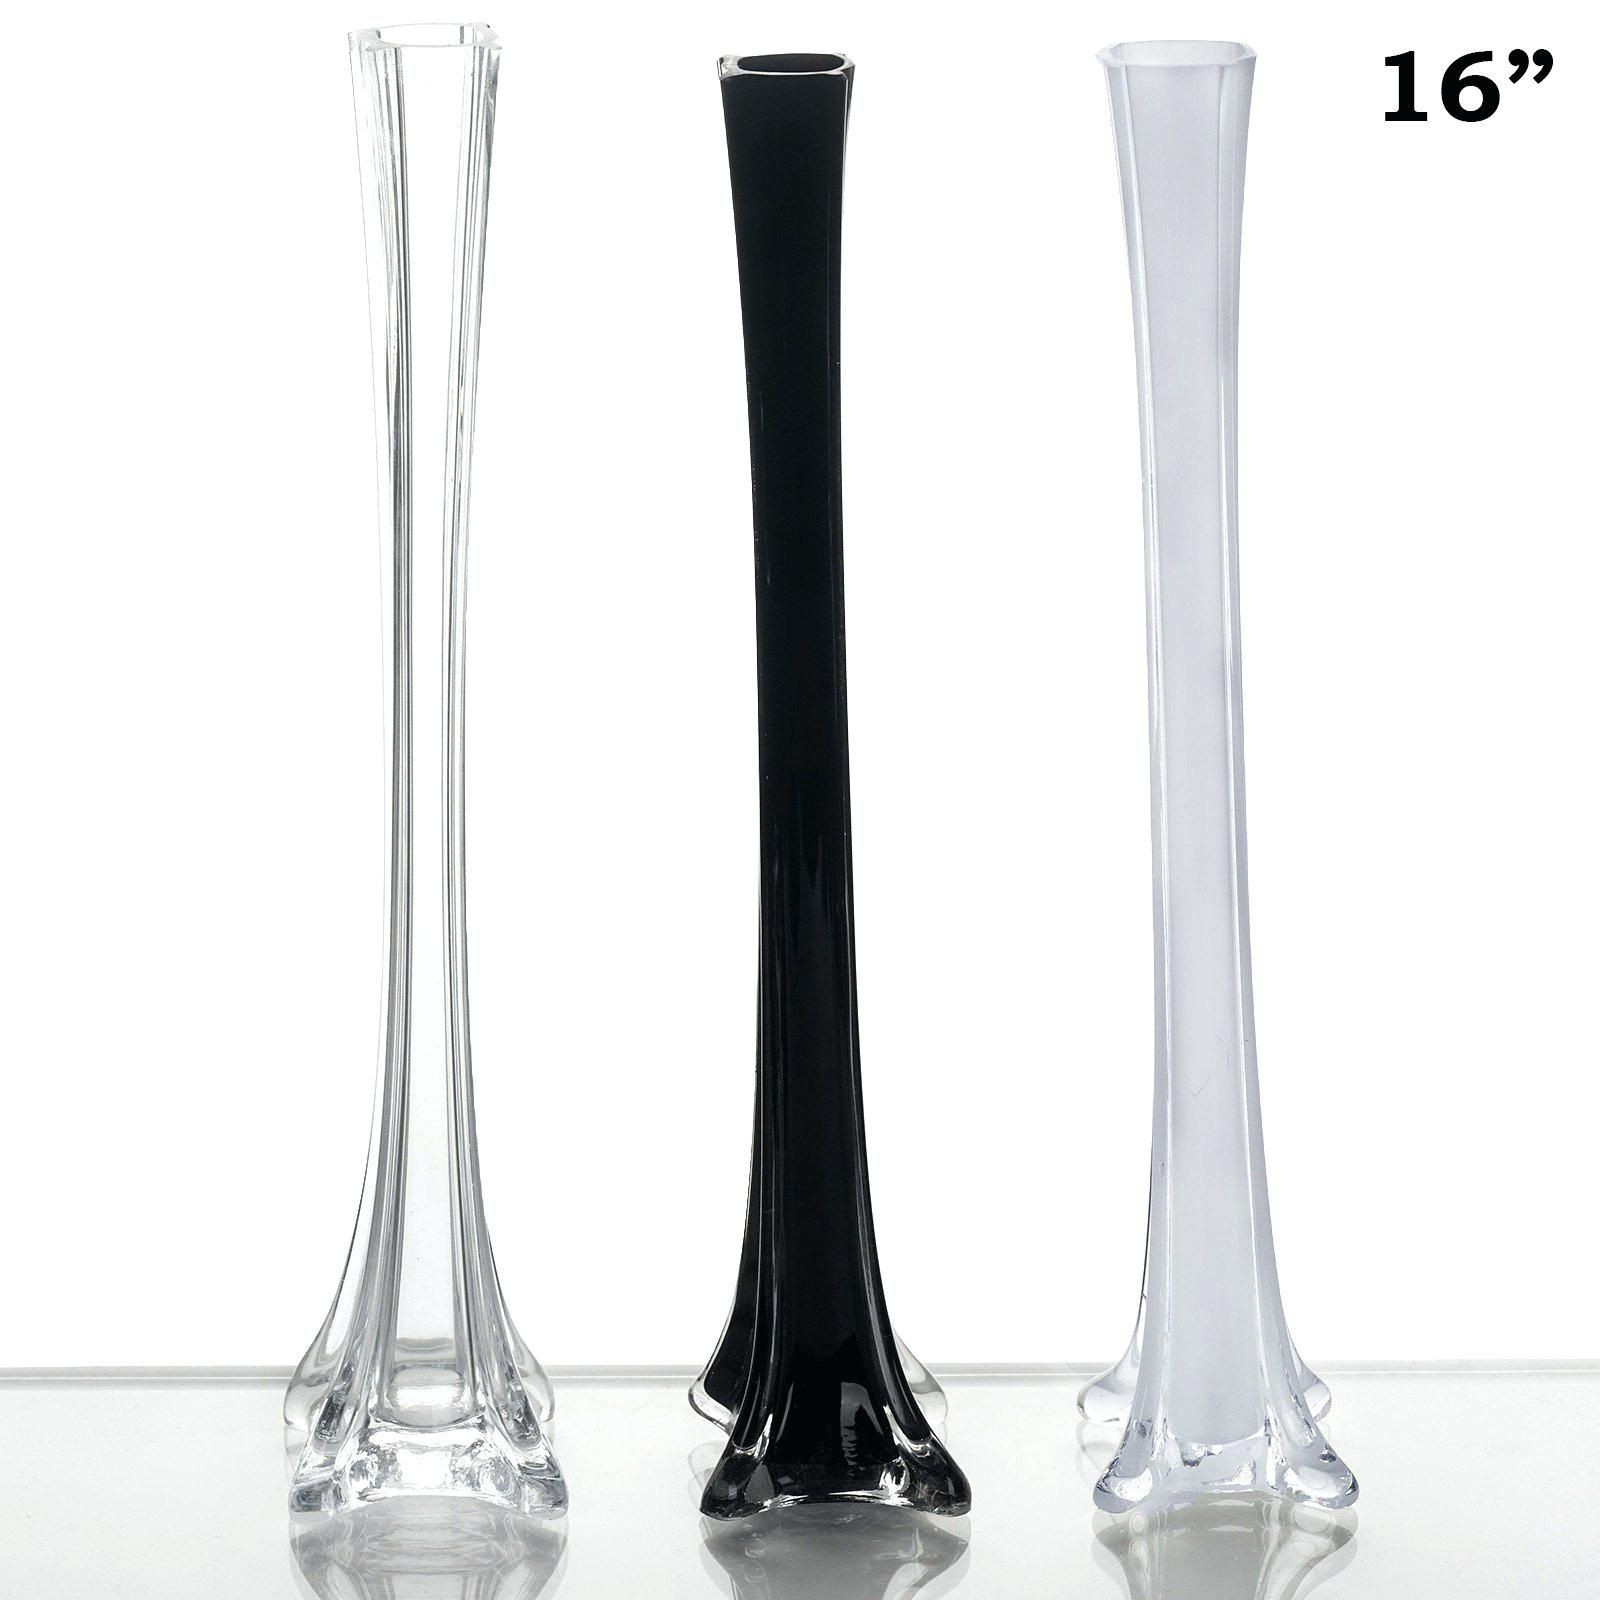 tall plastic cylinder vases of 40 glass vases bulk the weekly world with regard to gallery plastic eiffel tower vases wholesale drawings art gallery